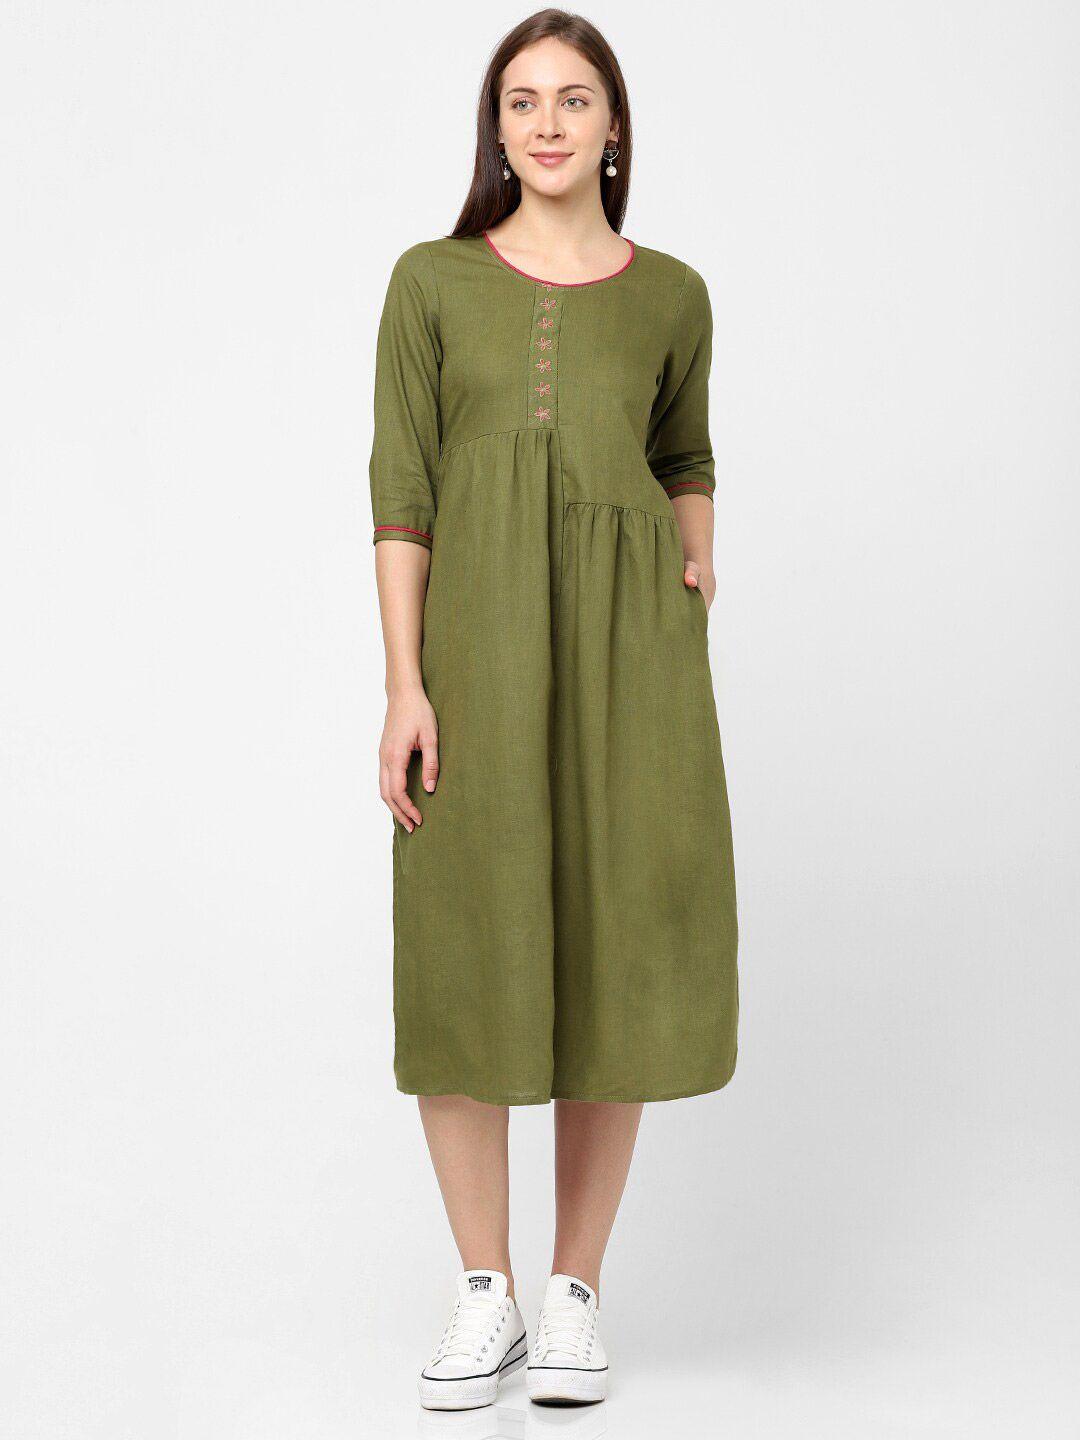 indifusion green floral embroidered linen midi dress